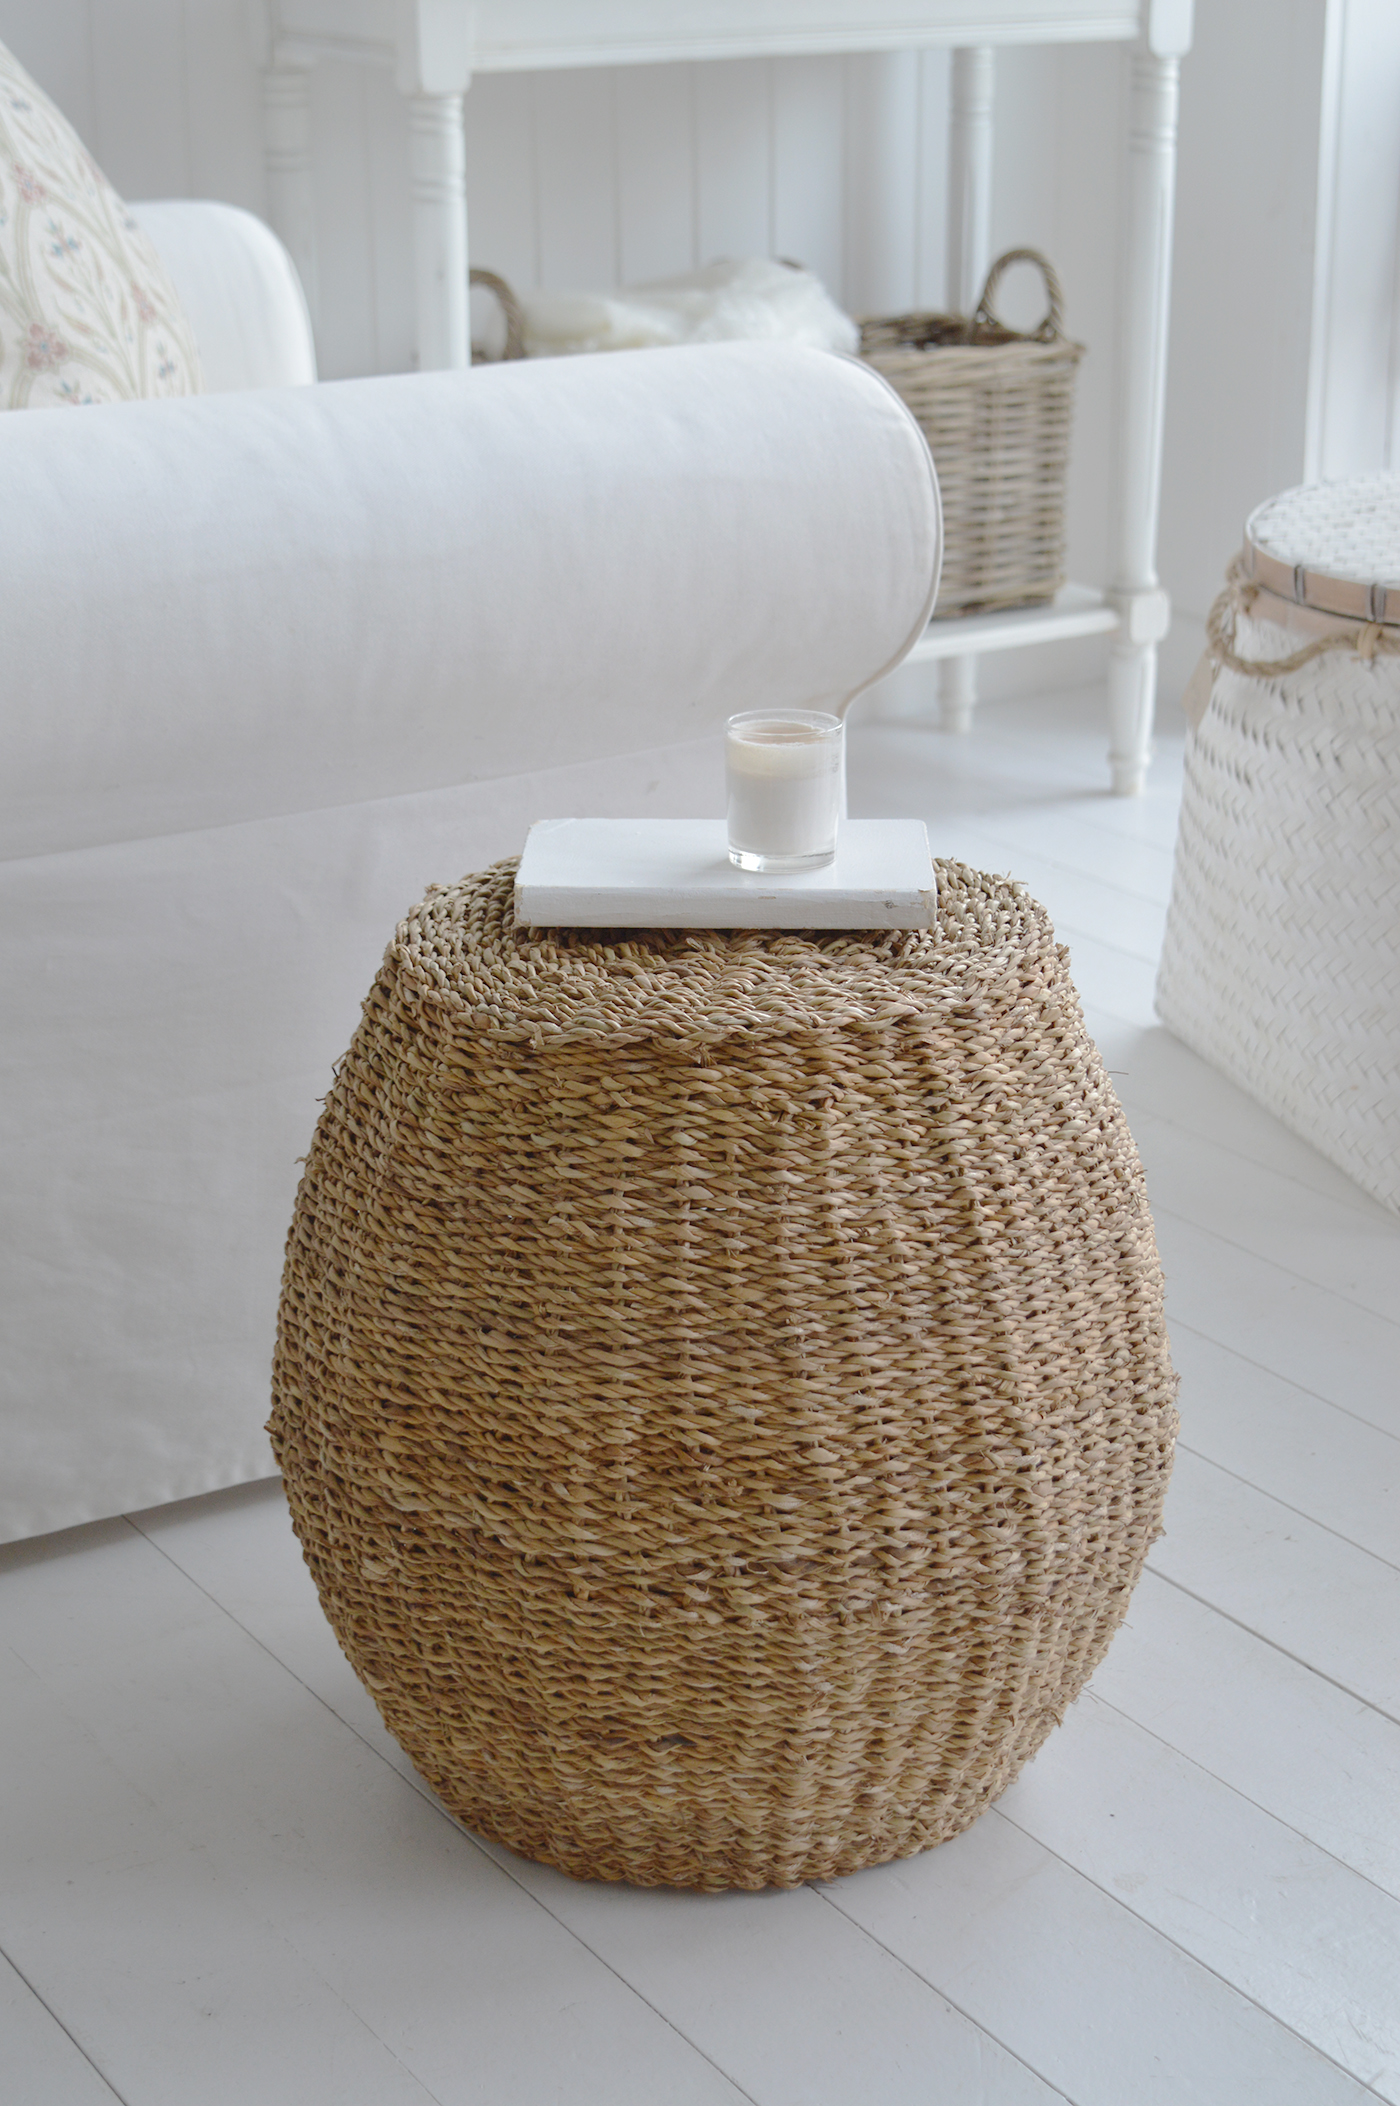 Beach House inter decor - Cove Bay Stool - New England Furniture for coastal, beach house and modern country furniture